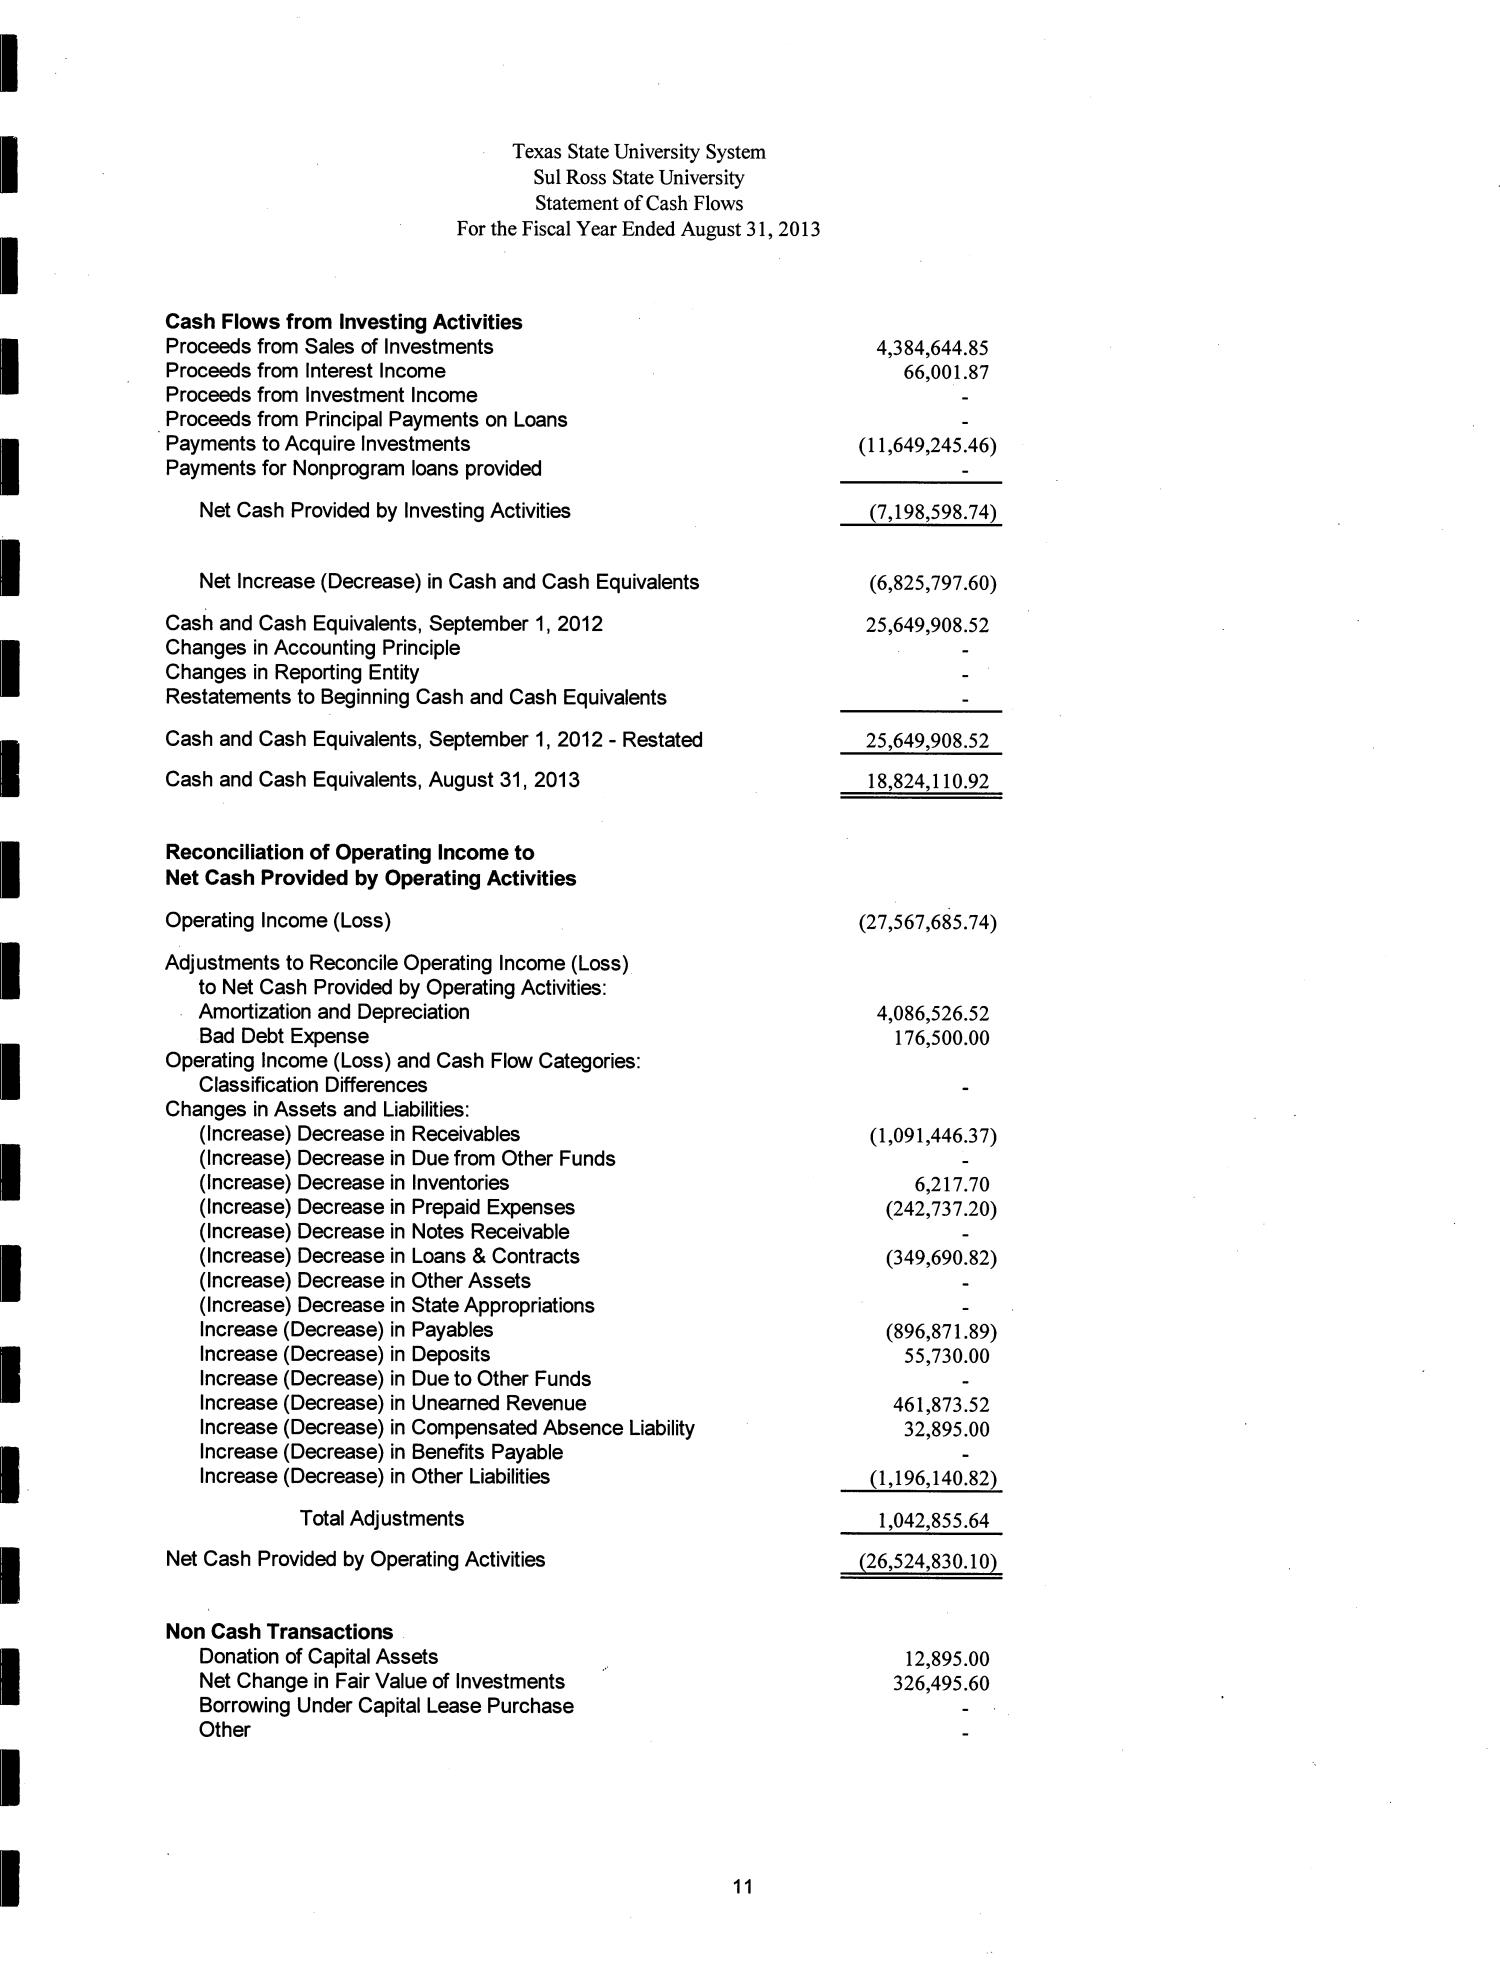 Sul Ross State University Annual Financial Report: 2013
                                                
                                                    11
                                                